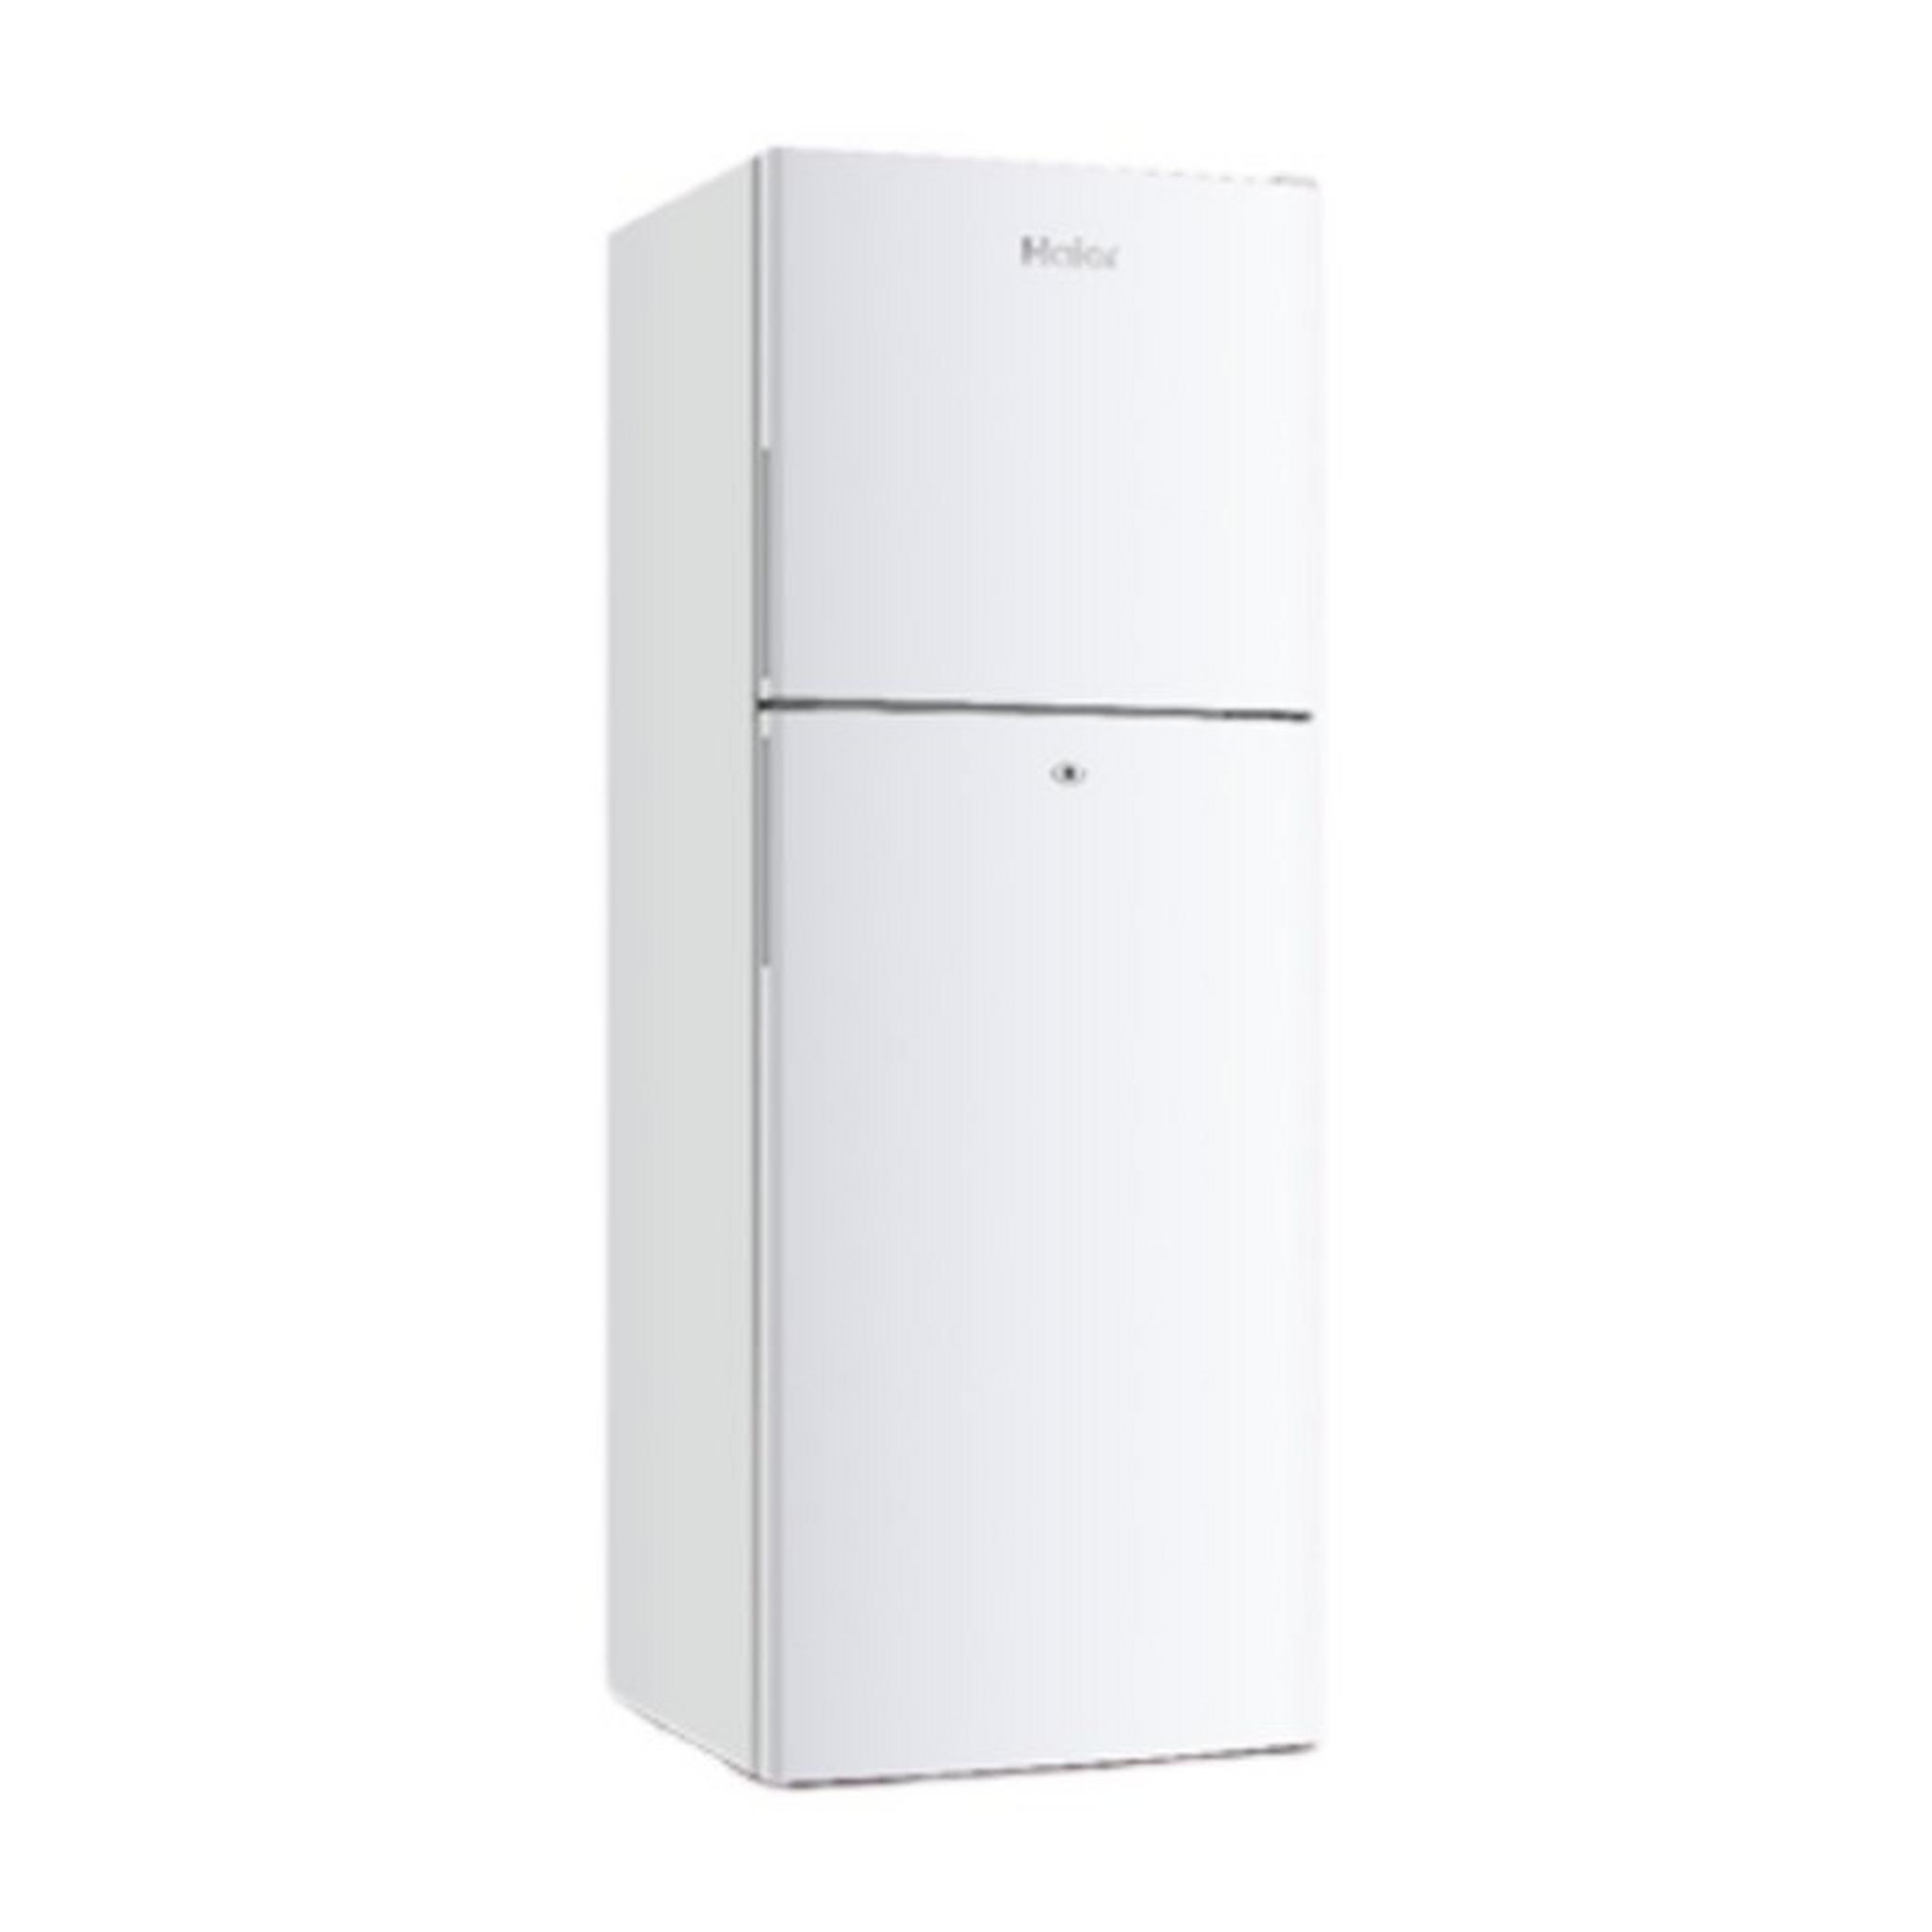 Haier 9CFT Top Mount Refrigerator (HRF-255WH)